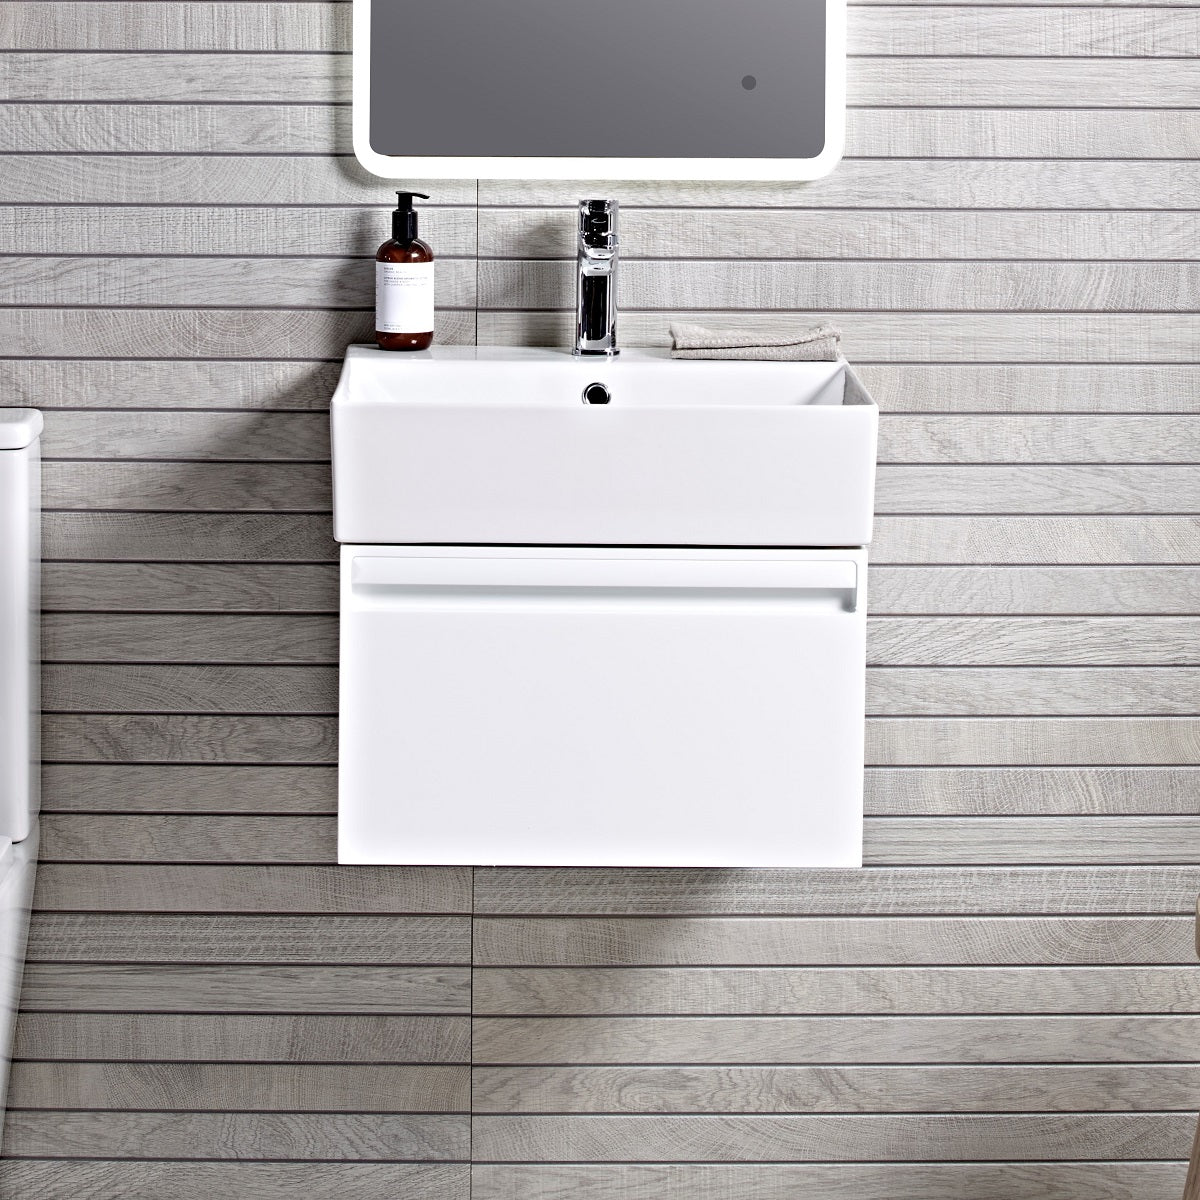 Tavistock Forum 500mm Wall Mounted Unit &amp; Basin - Various Colours wide view against wooden wall and mirror above unit/basin FR50WW